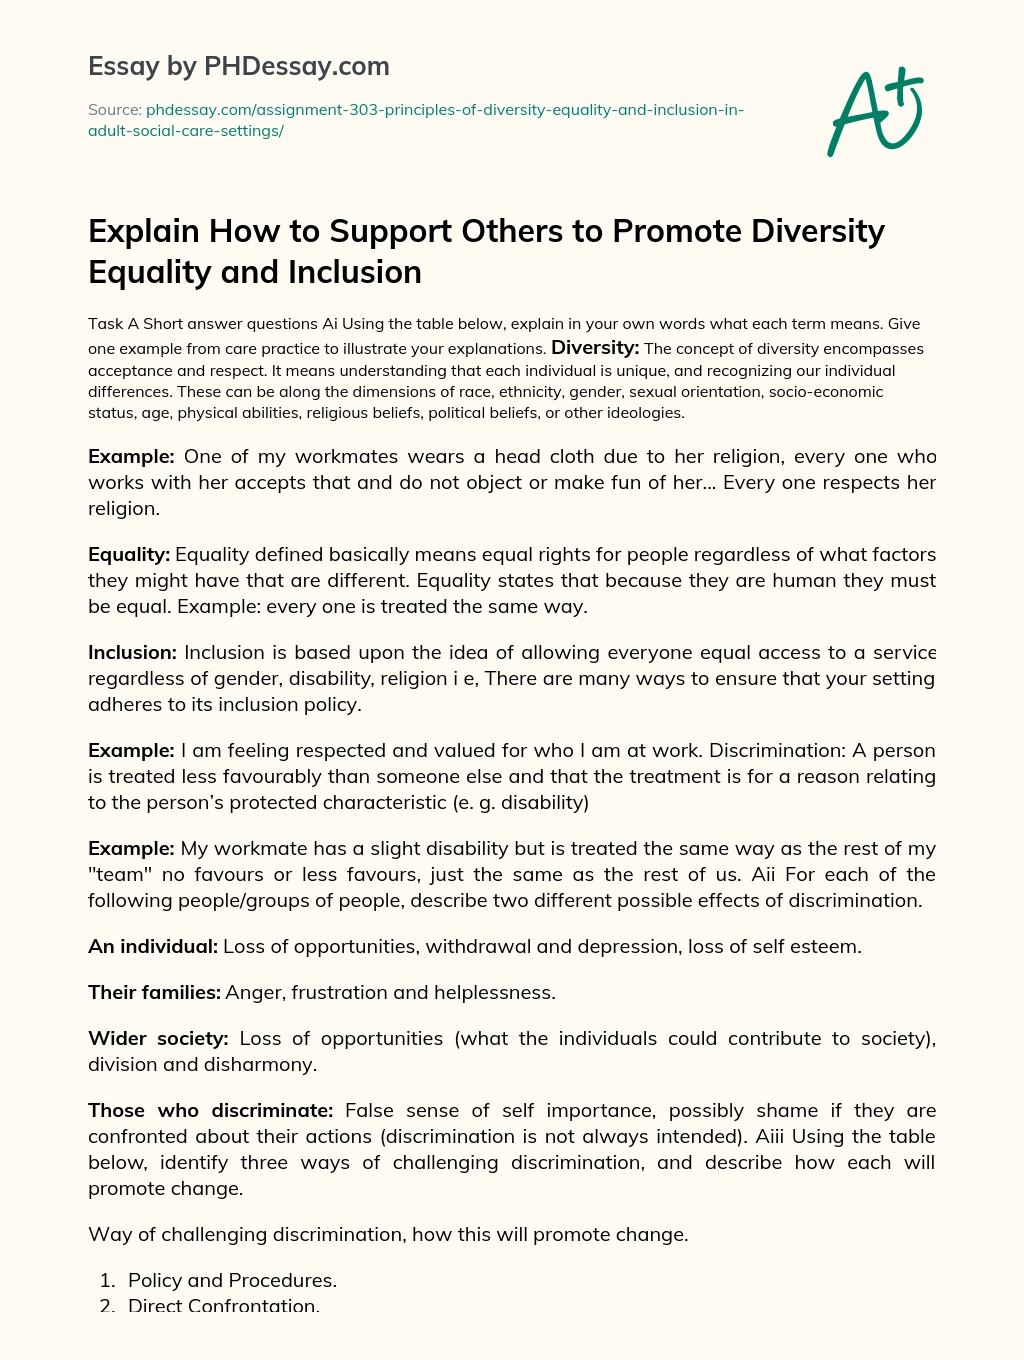 diversity equality and inclusion essay